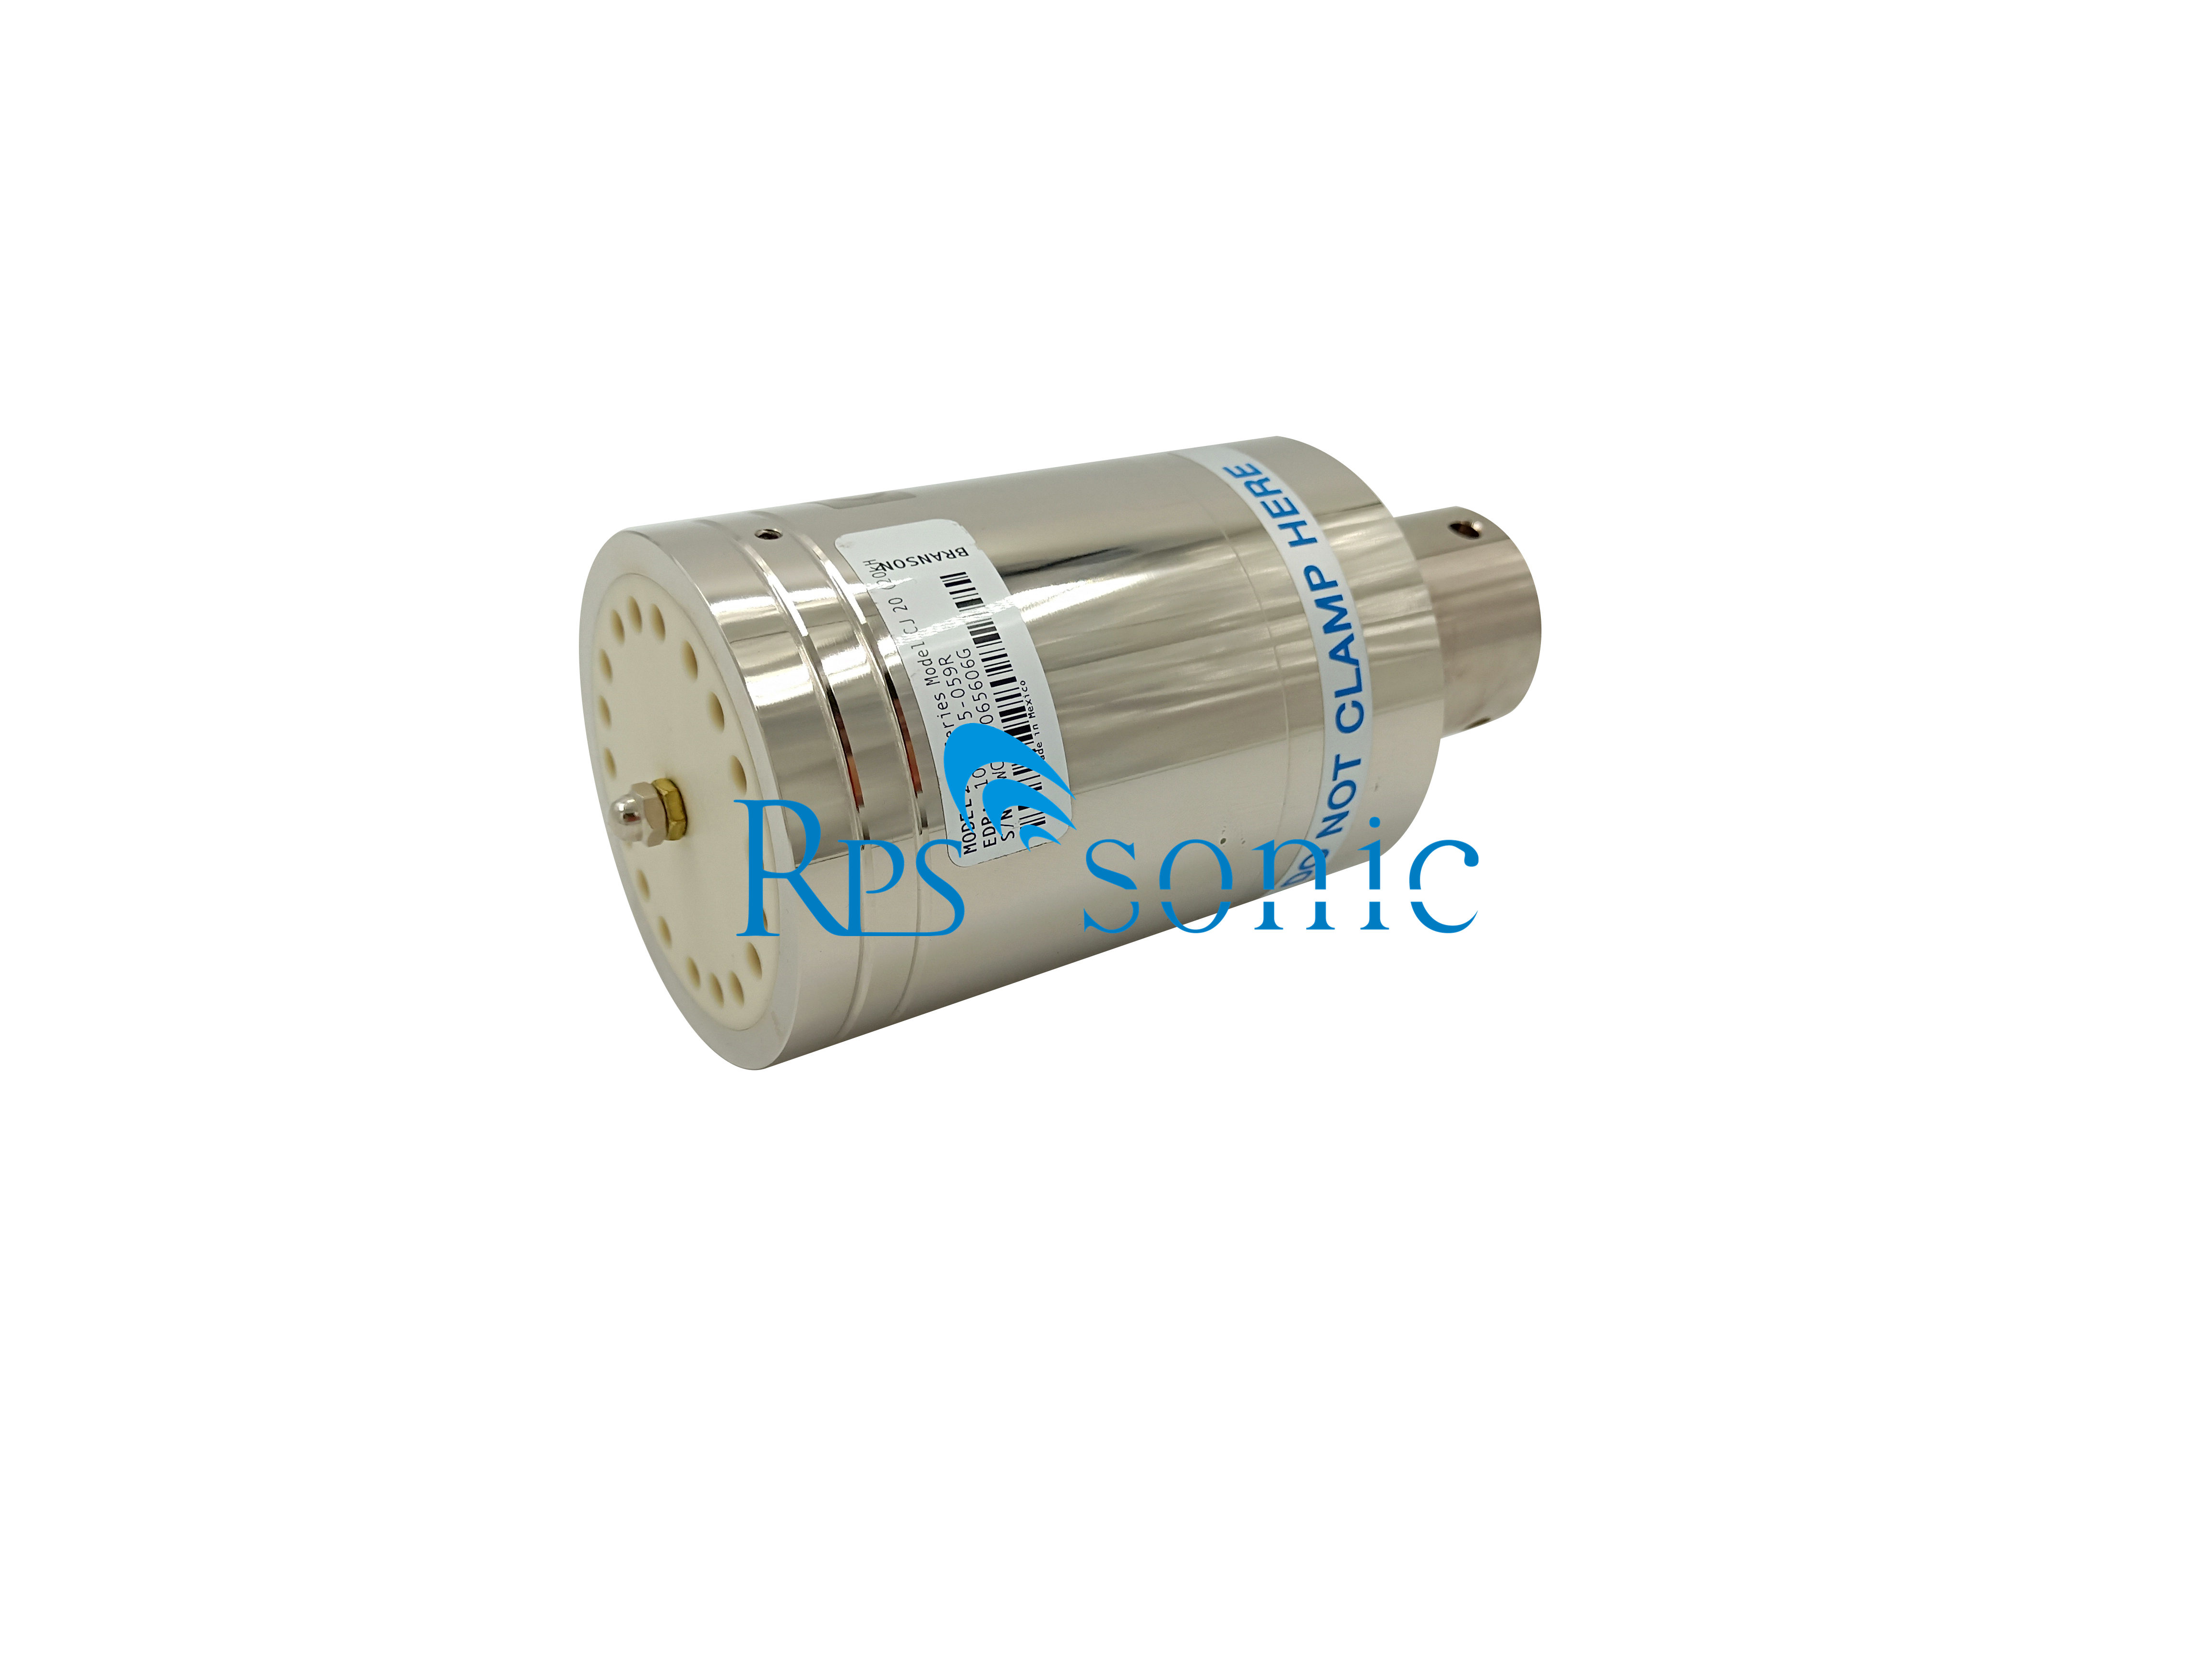 Original Branson Ultrasonic Transducers CJ20 For 2000 / 2000X actuator and IW systems.